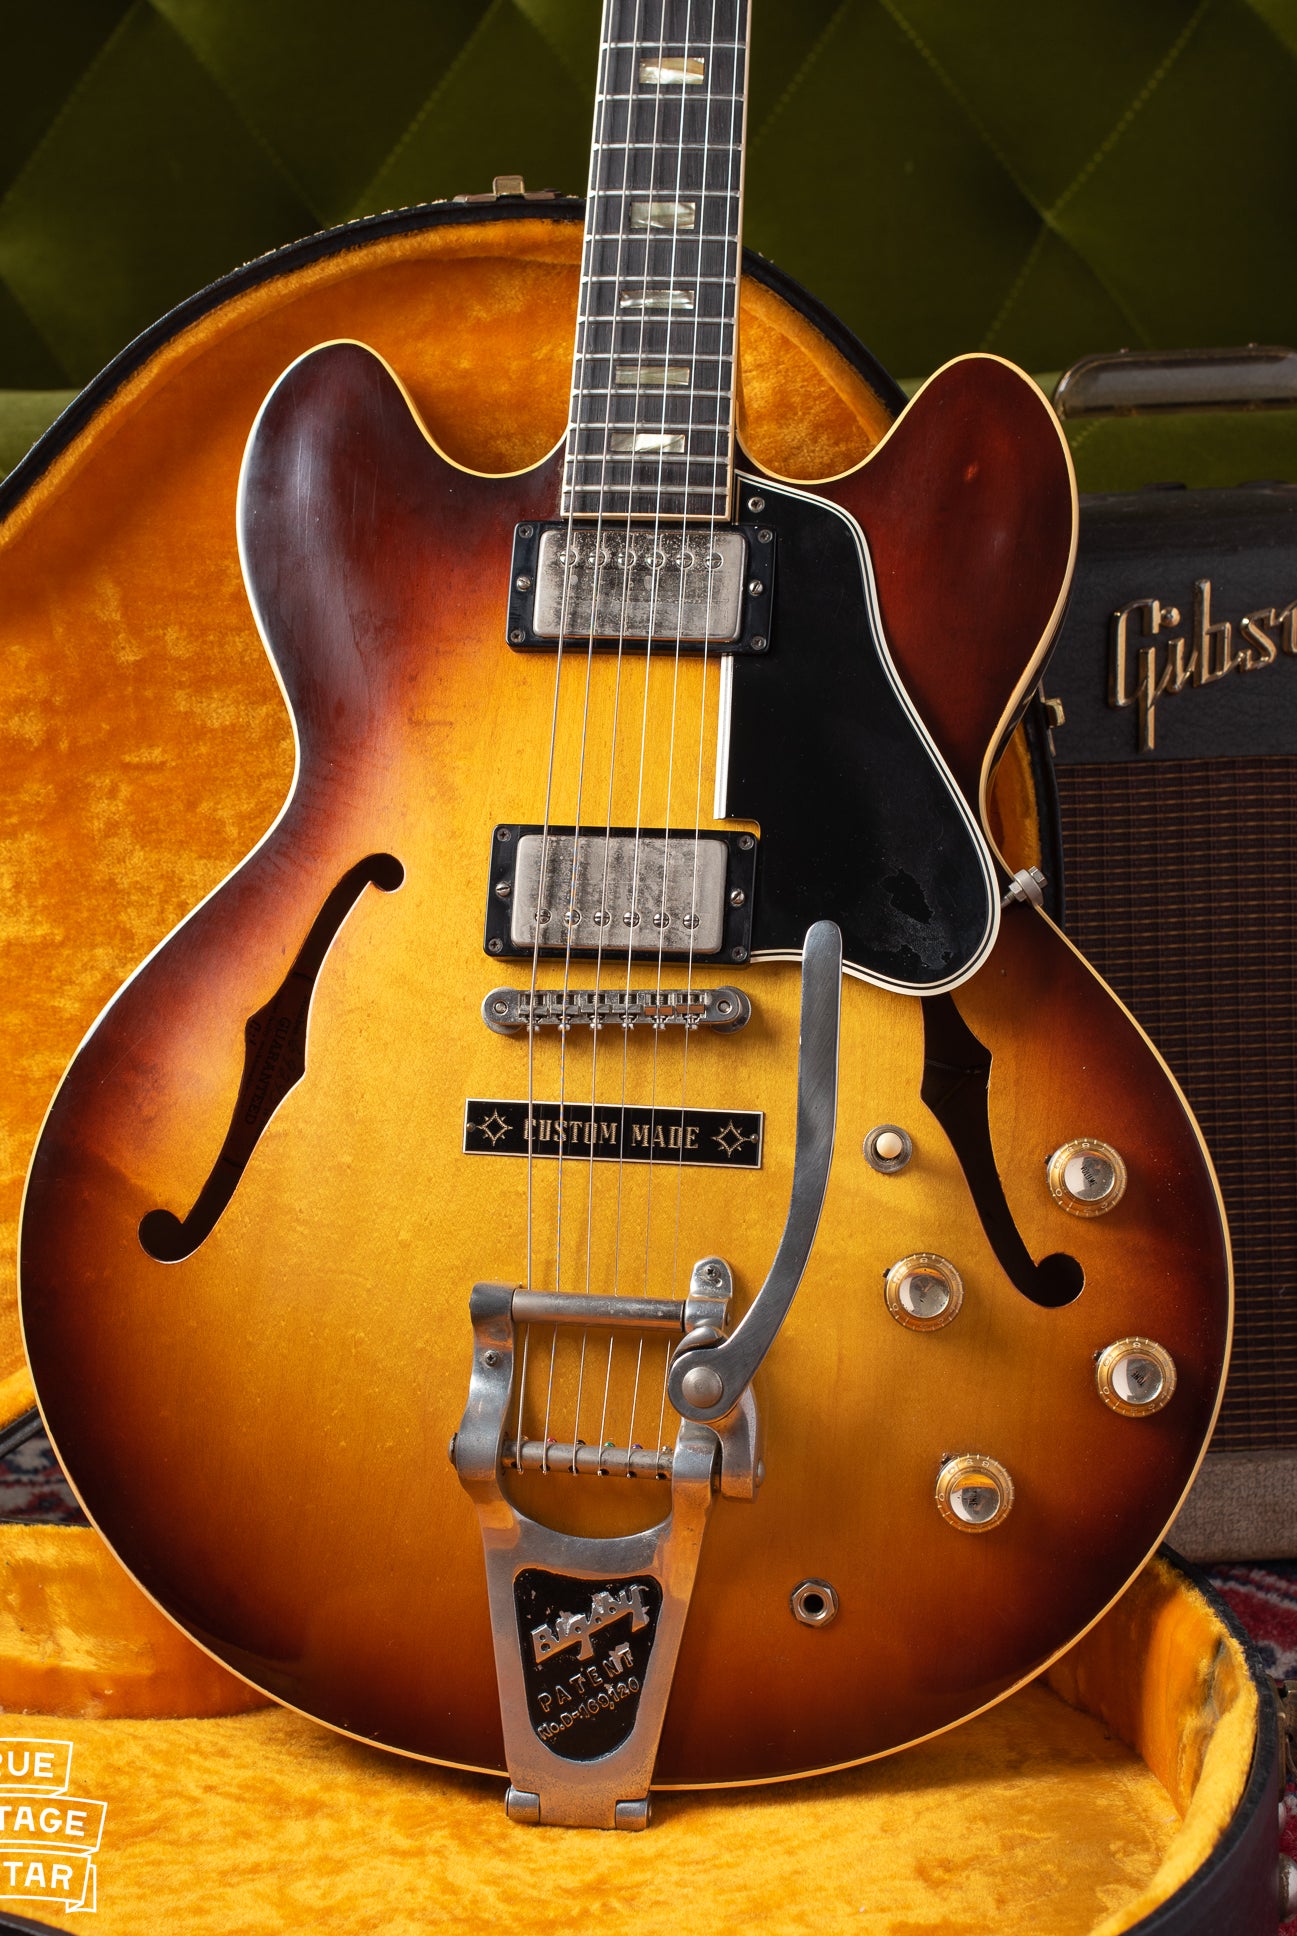 Vintage 1964 Gibson ES-335 TD Sunburst finish with Bigsby tailpiece and Custom Made plaque